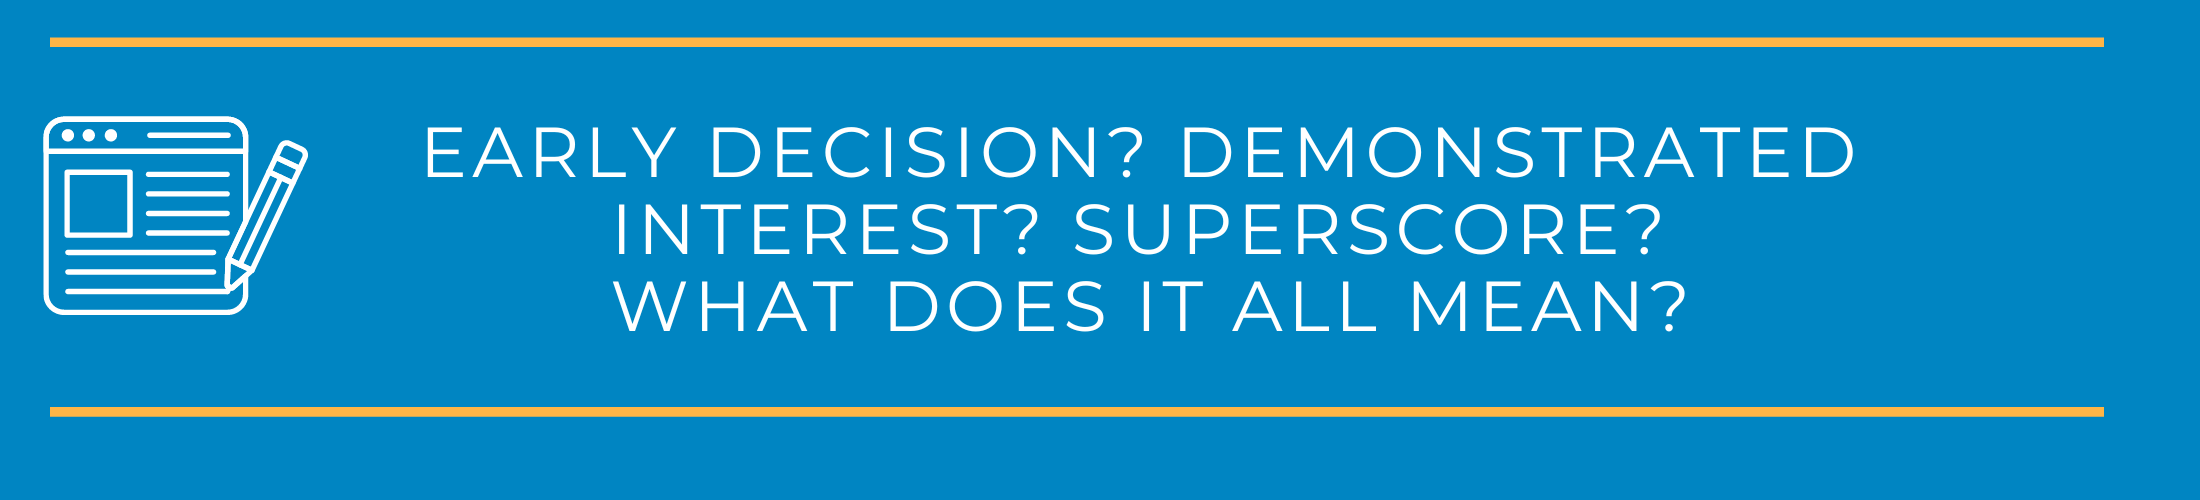 Early Decision? Demonstrated Interest? Superscore? What does it all mean?